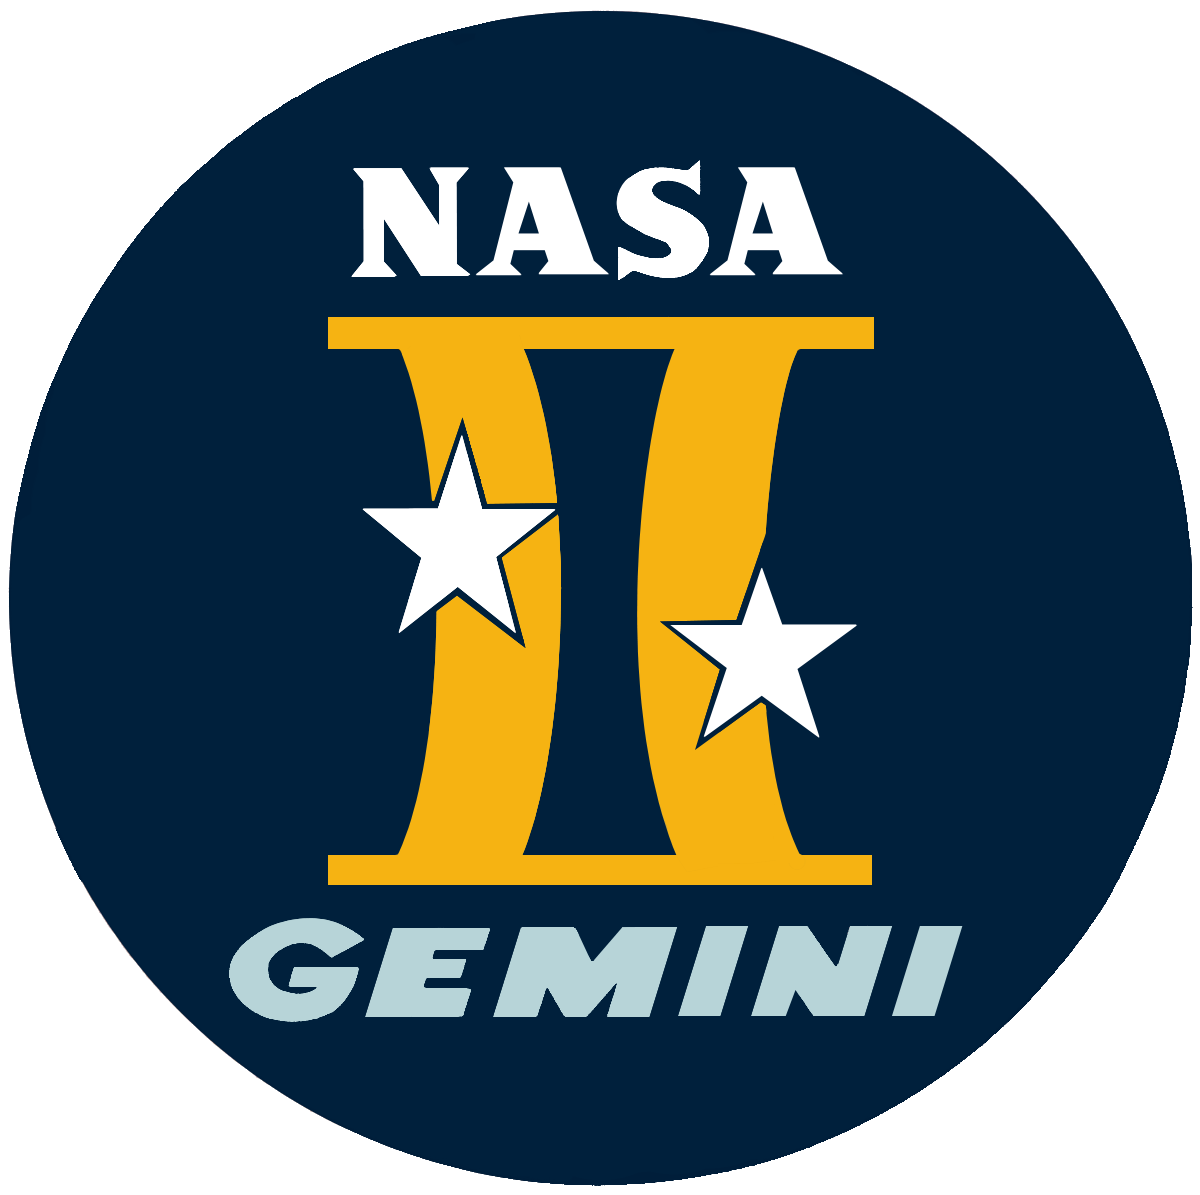 Mission patch for Gemini II